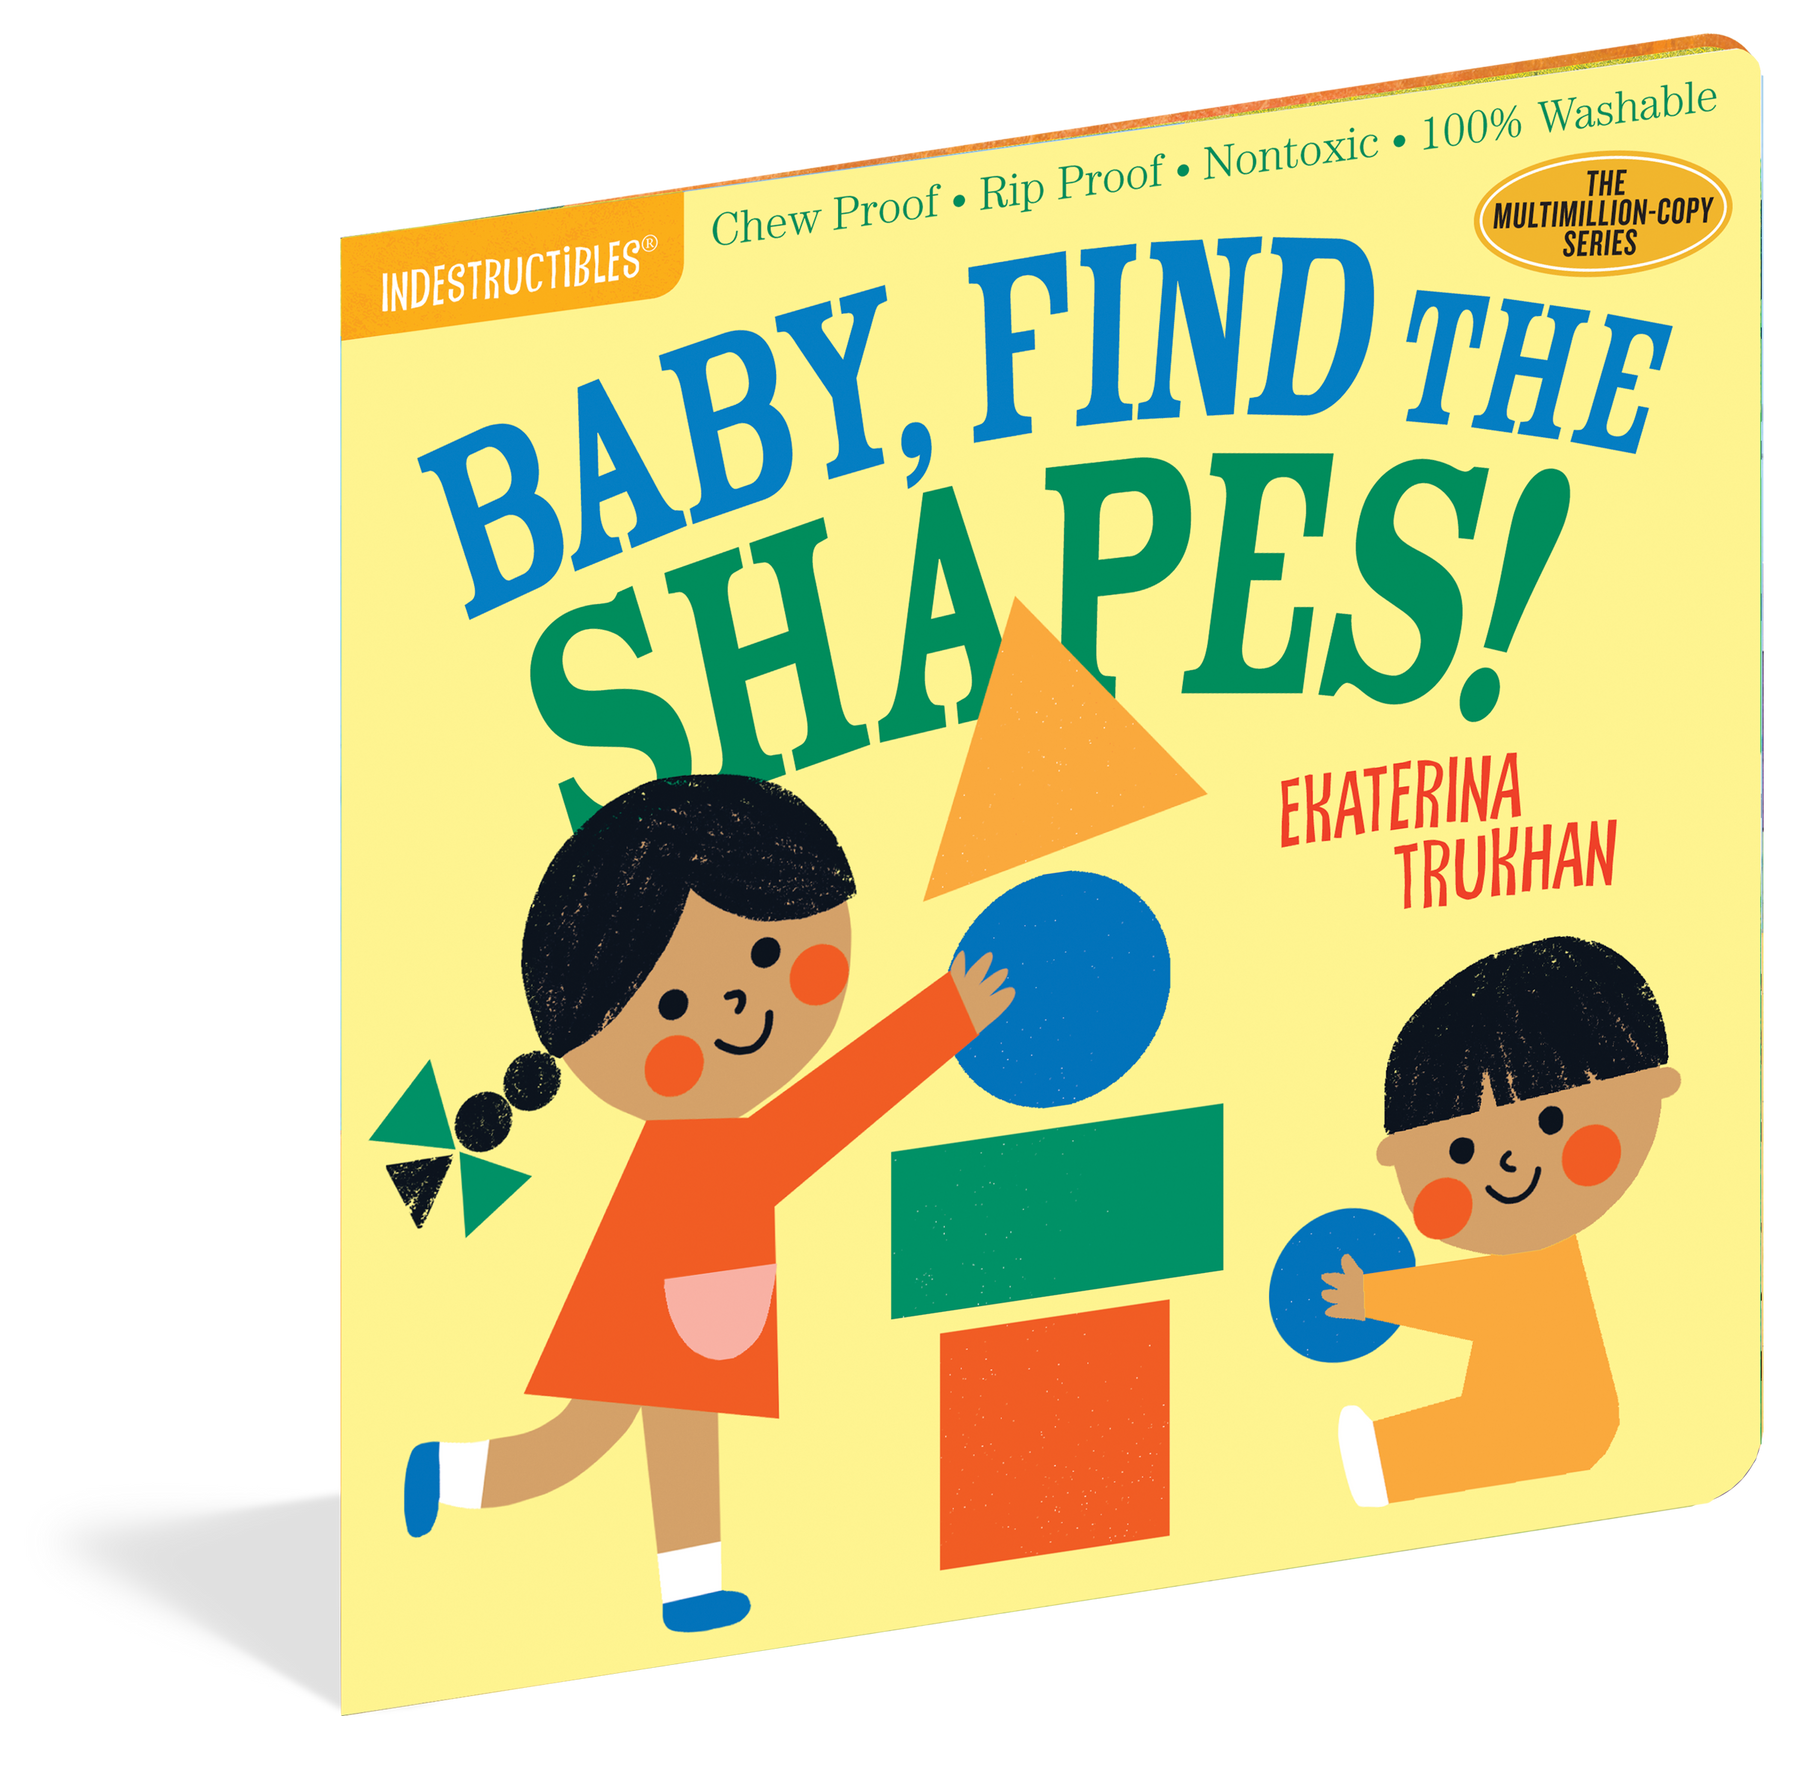 Indestructibles: Baby, Find The Shapes! Book - JKA Toys